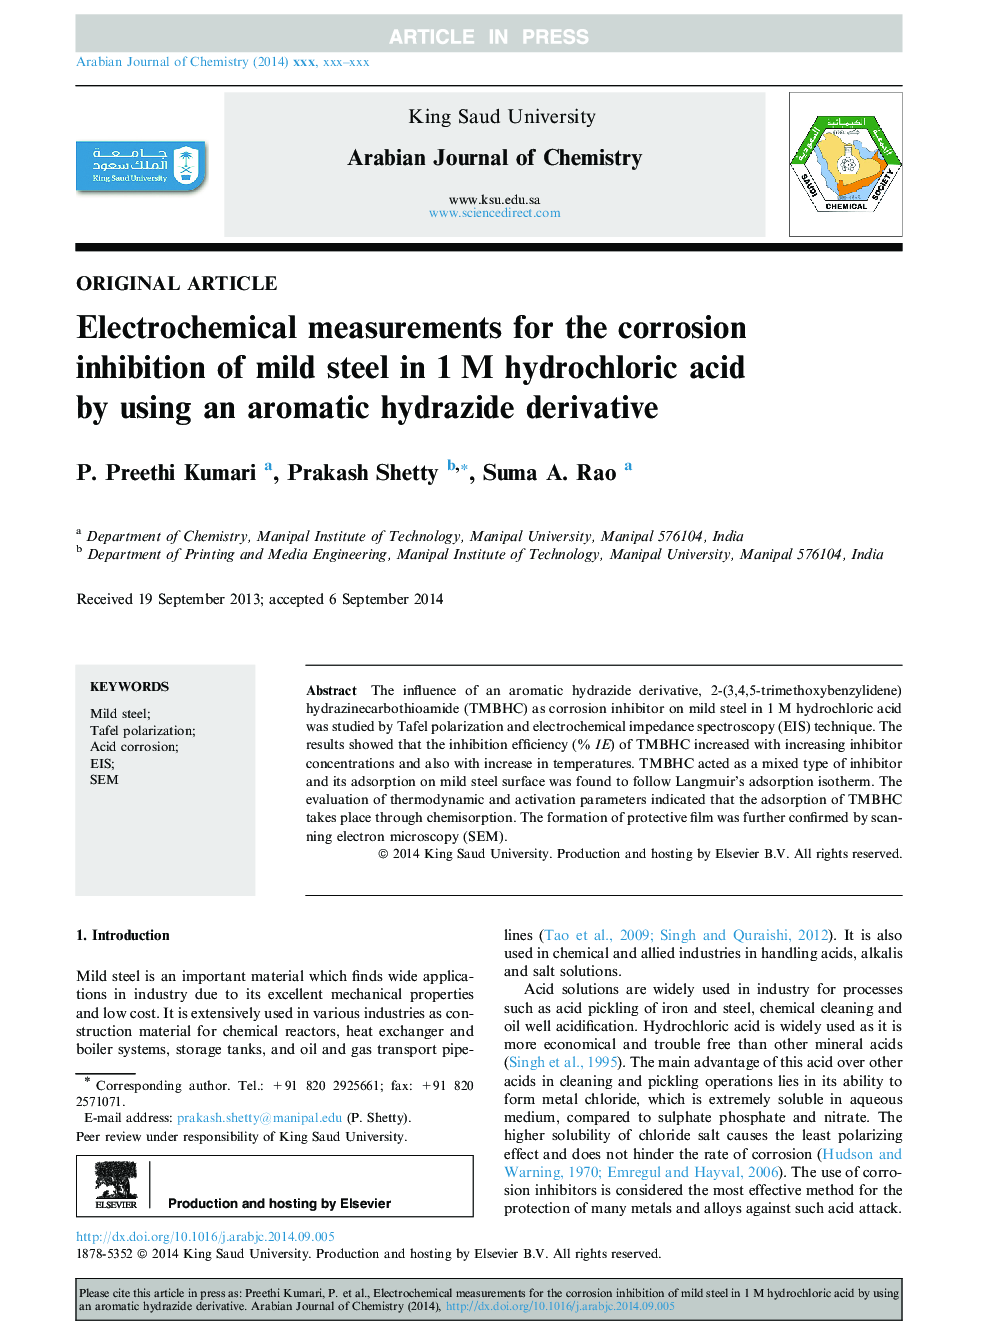 Electrochemical measurements for the corrosion inhibition of mild steel in 1Â M hydrochloric acid by using an aromatic hydrazide derivative